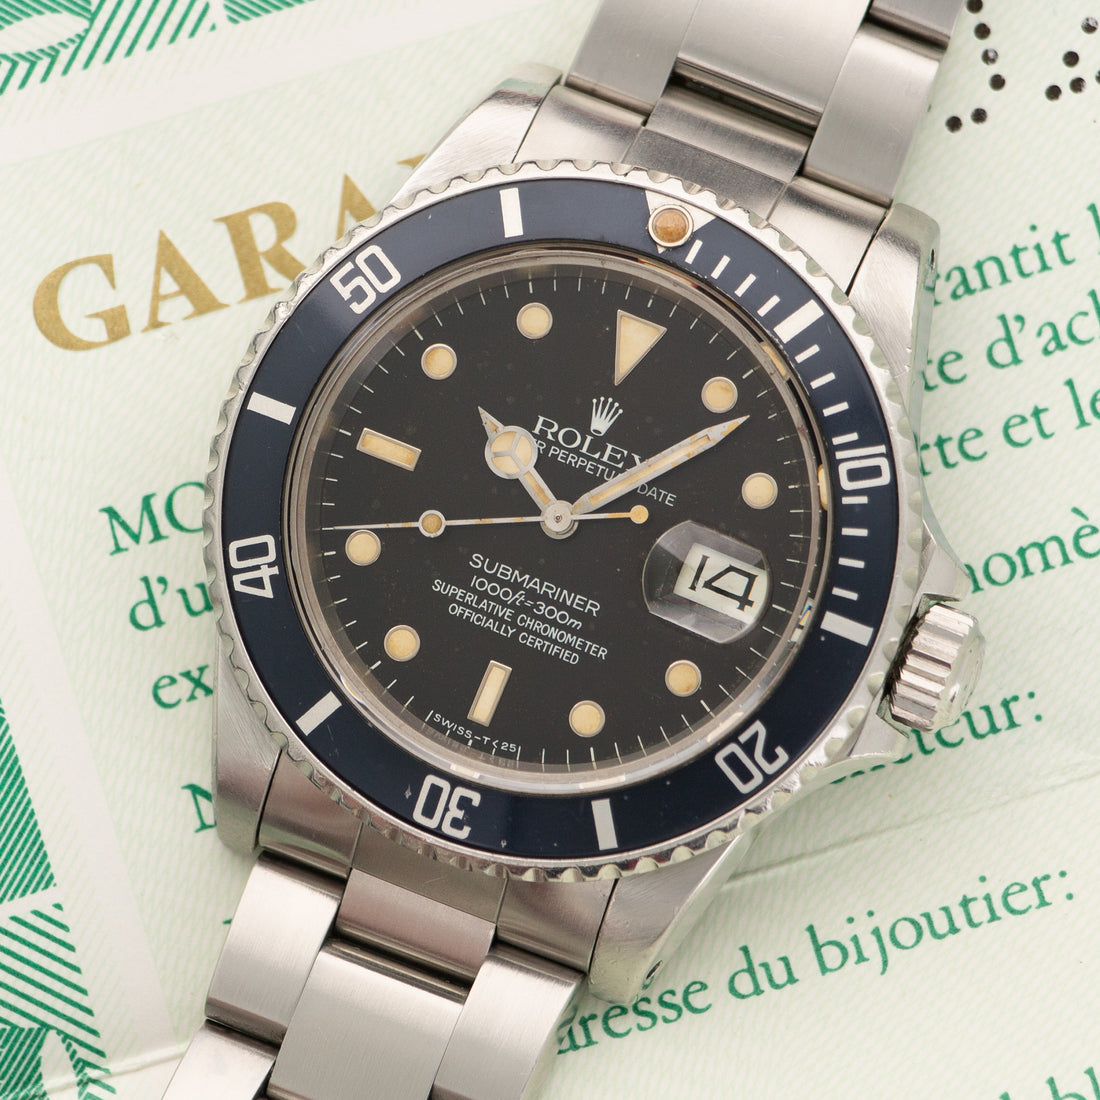 Rolex Submariner Watch Ref. 16800 with Original Box and Papers